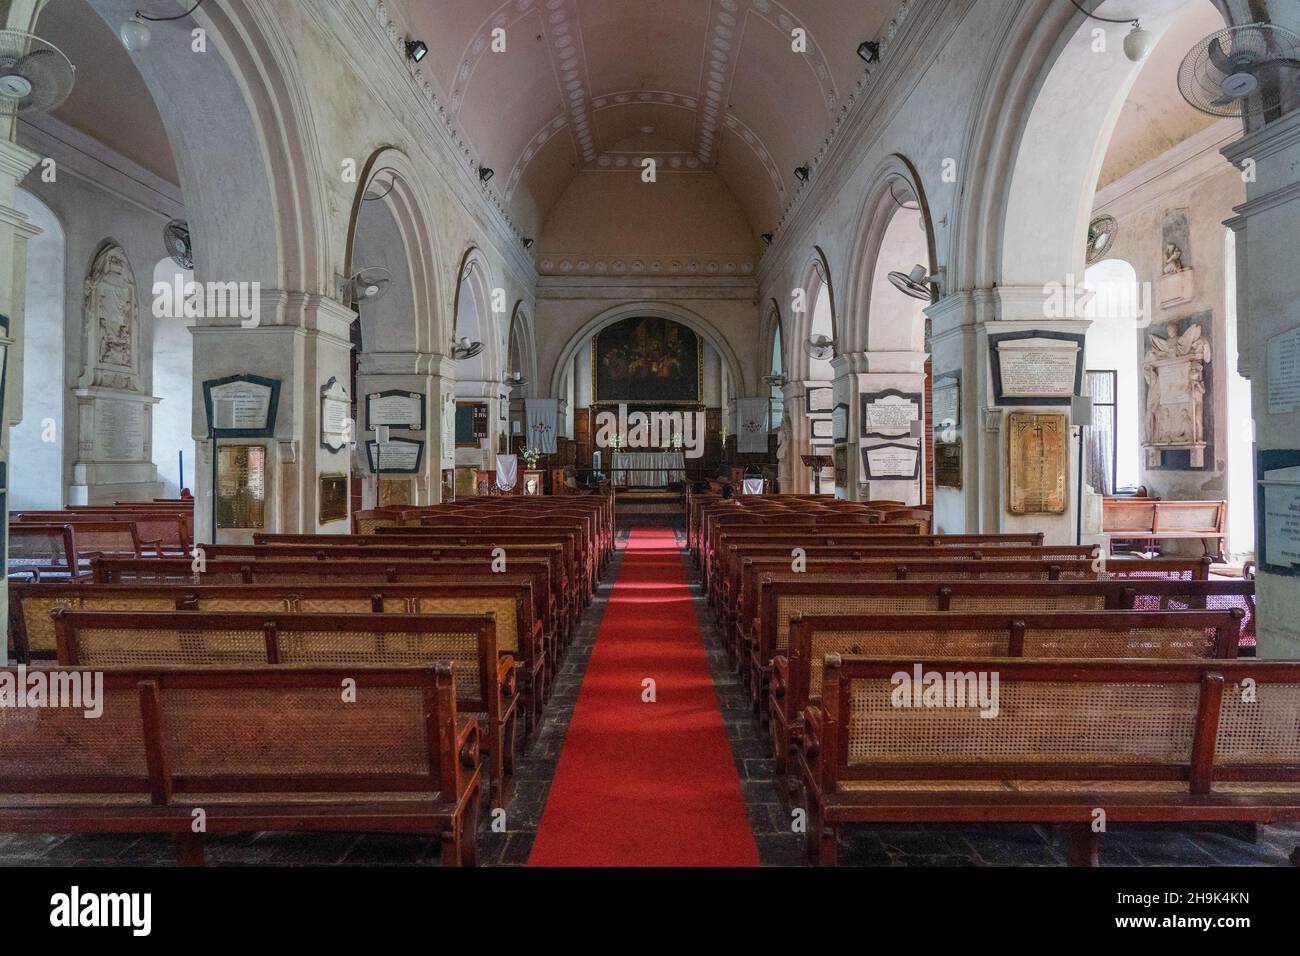 St. Mary's Church, Fort St. George in Chenai. From a series of travel photos in South India. Photo date: Monday, January 6, 2020. Photo credit should read: Richard Gray/EMPICS Stock Photo